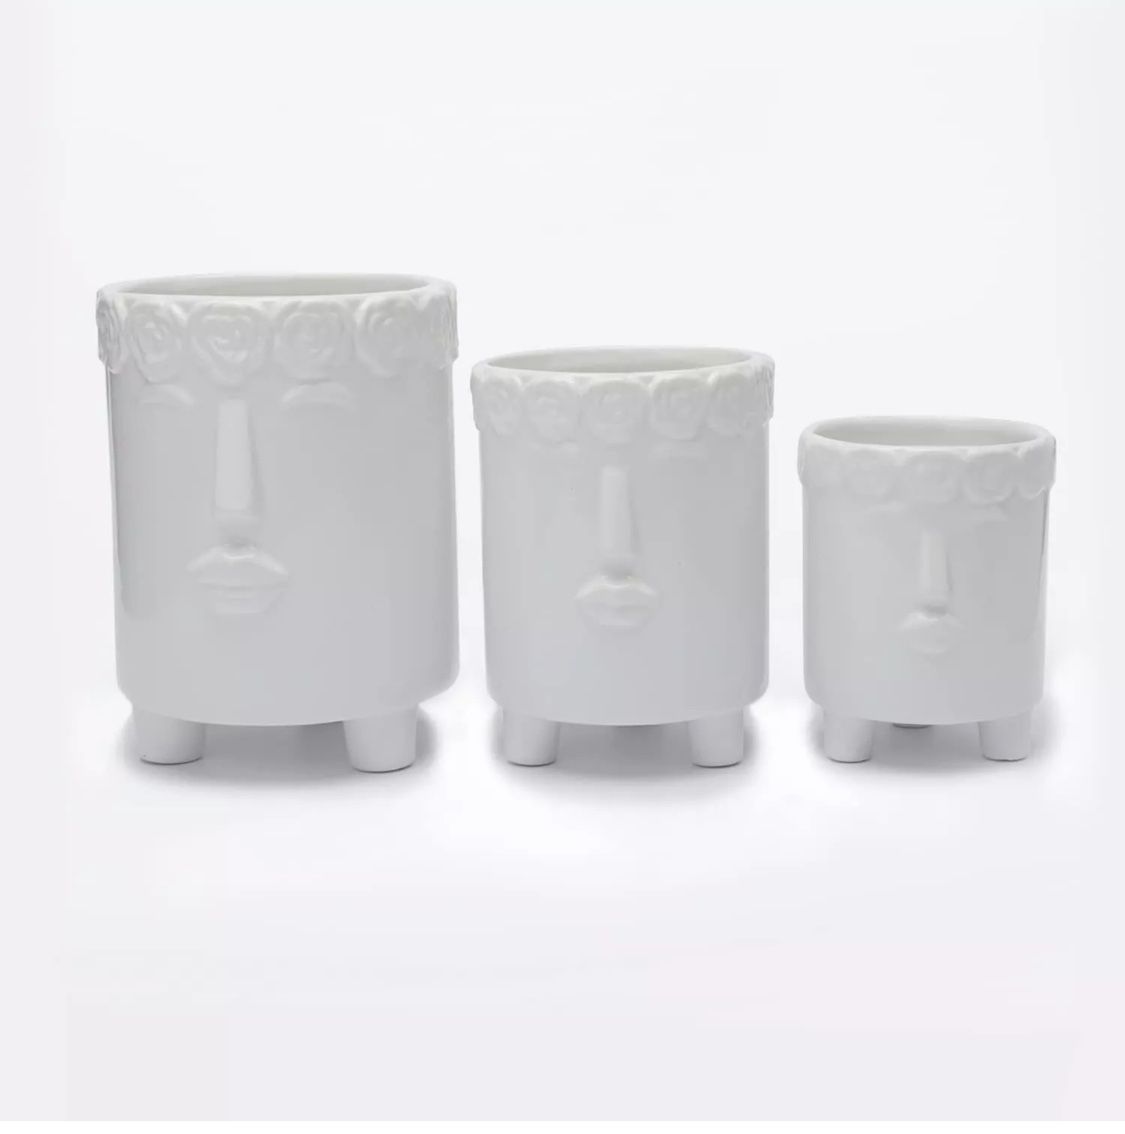 Free To Fly Ceramic Plant Pots Set of 3 Decor Accents